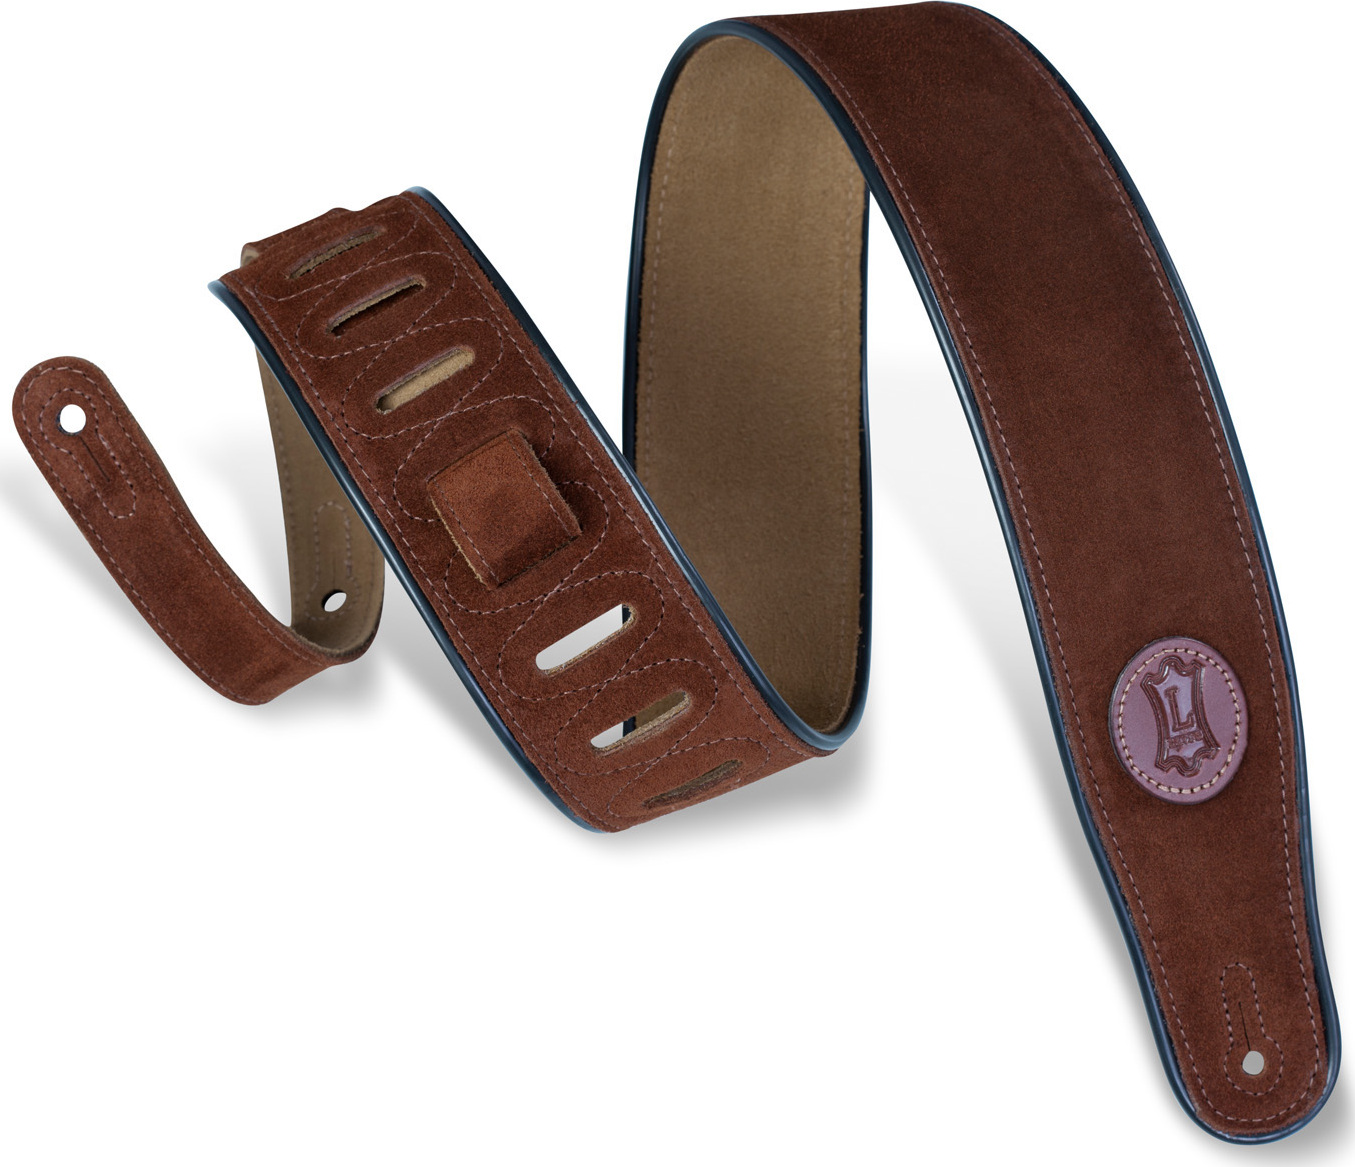 Levy's Suede Leather Sangle Daim Mss3 Brown - Guitar strap - Main picture